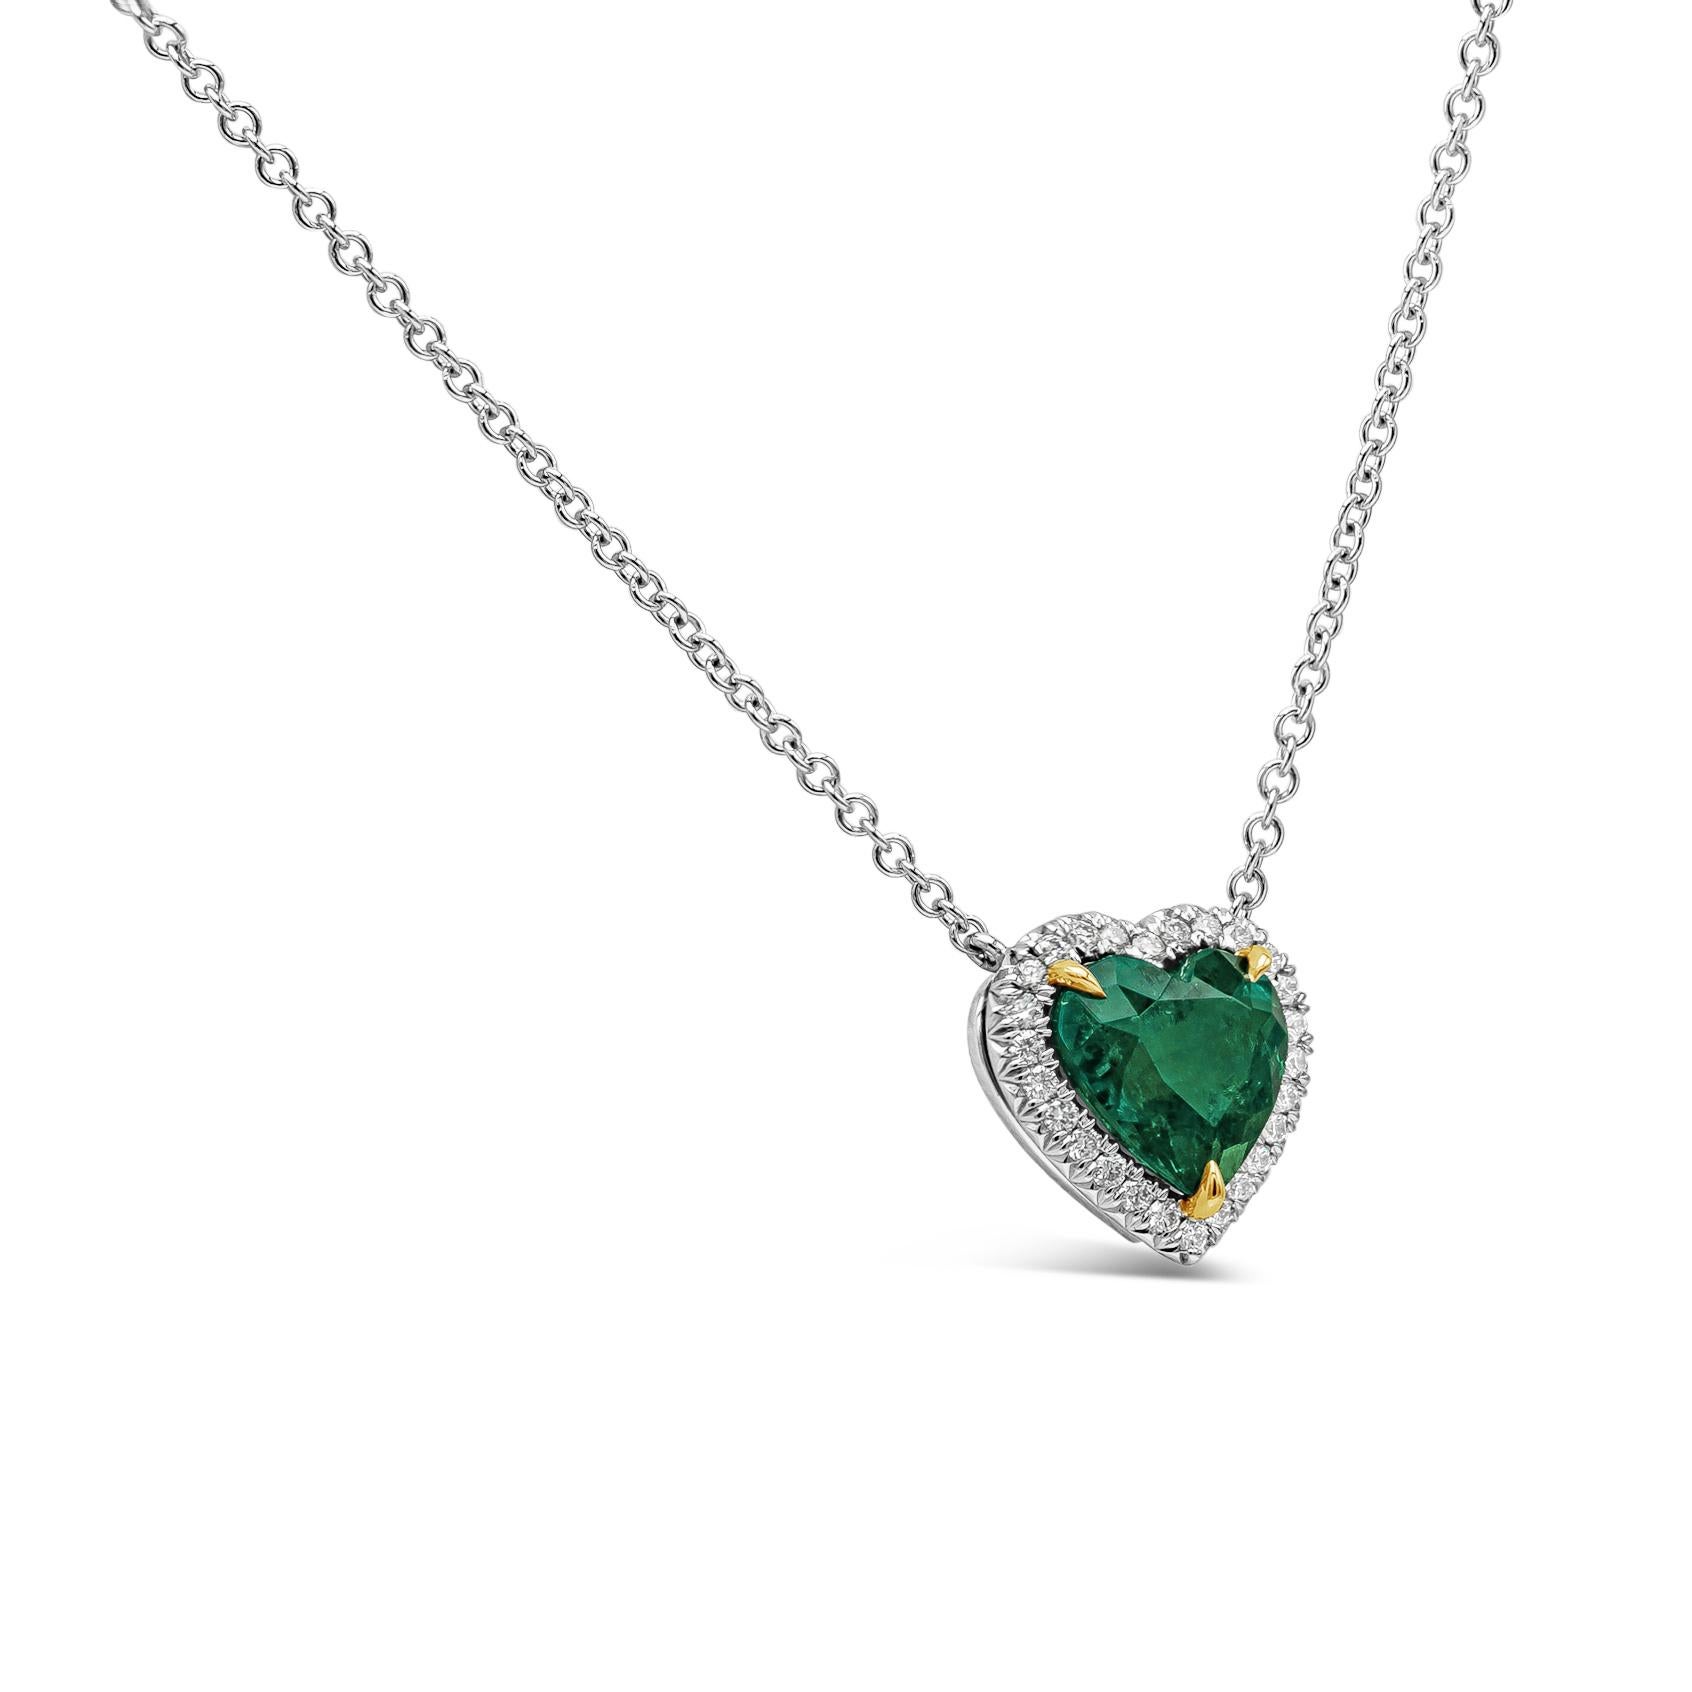 A rare piece of jewelry showcasing a 1.68 carat vivid color green emerald in a heart shape, surrounded by a single row of round brilliant diamonds set in platinum.  Pendant is suspended on an 18 inch 18k white gold chain. Center emerald is certified